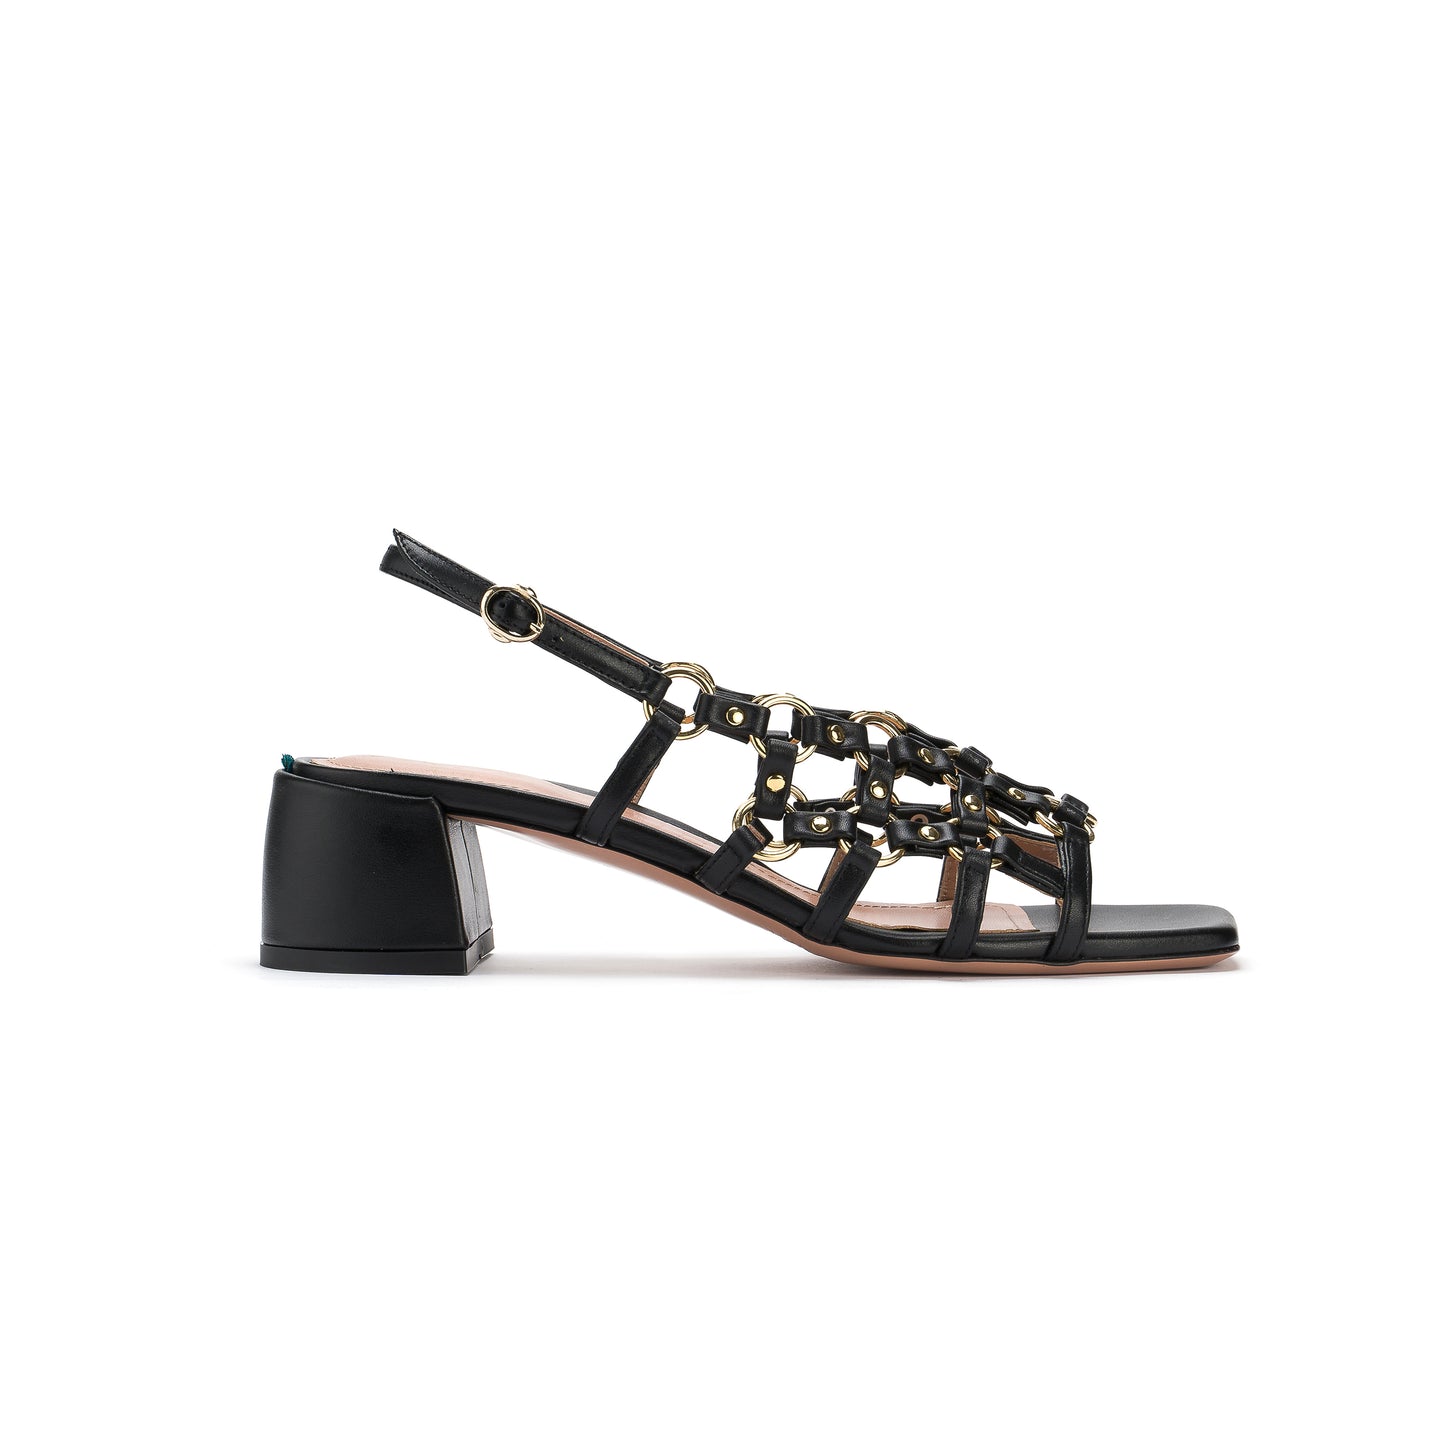 Sandal with rings in black nappa leather - Second life